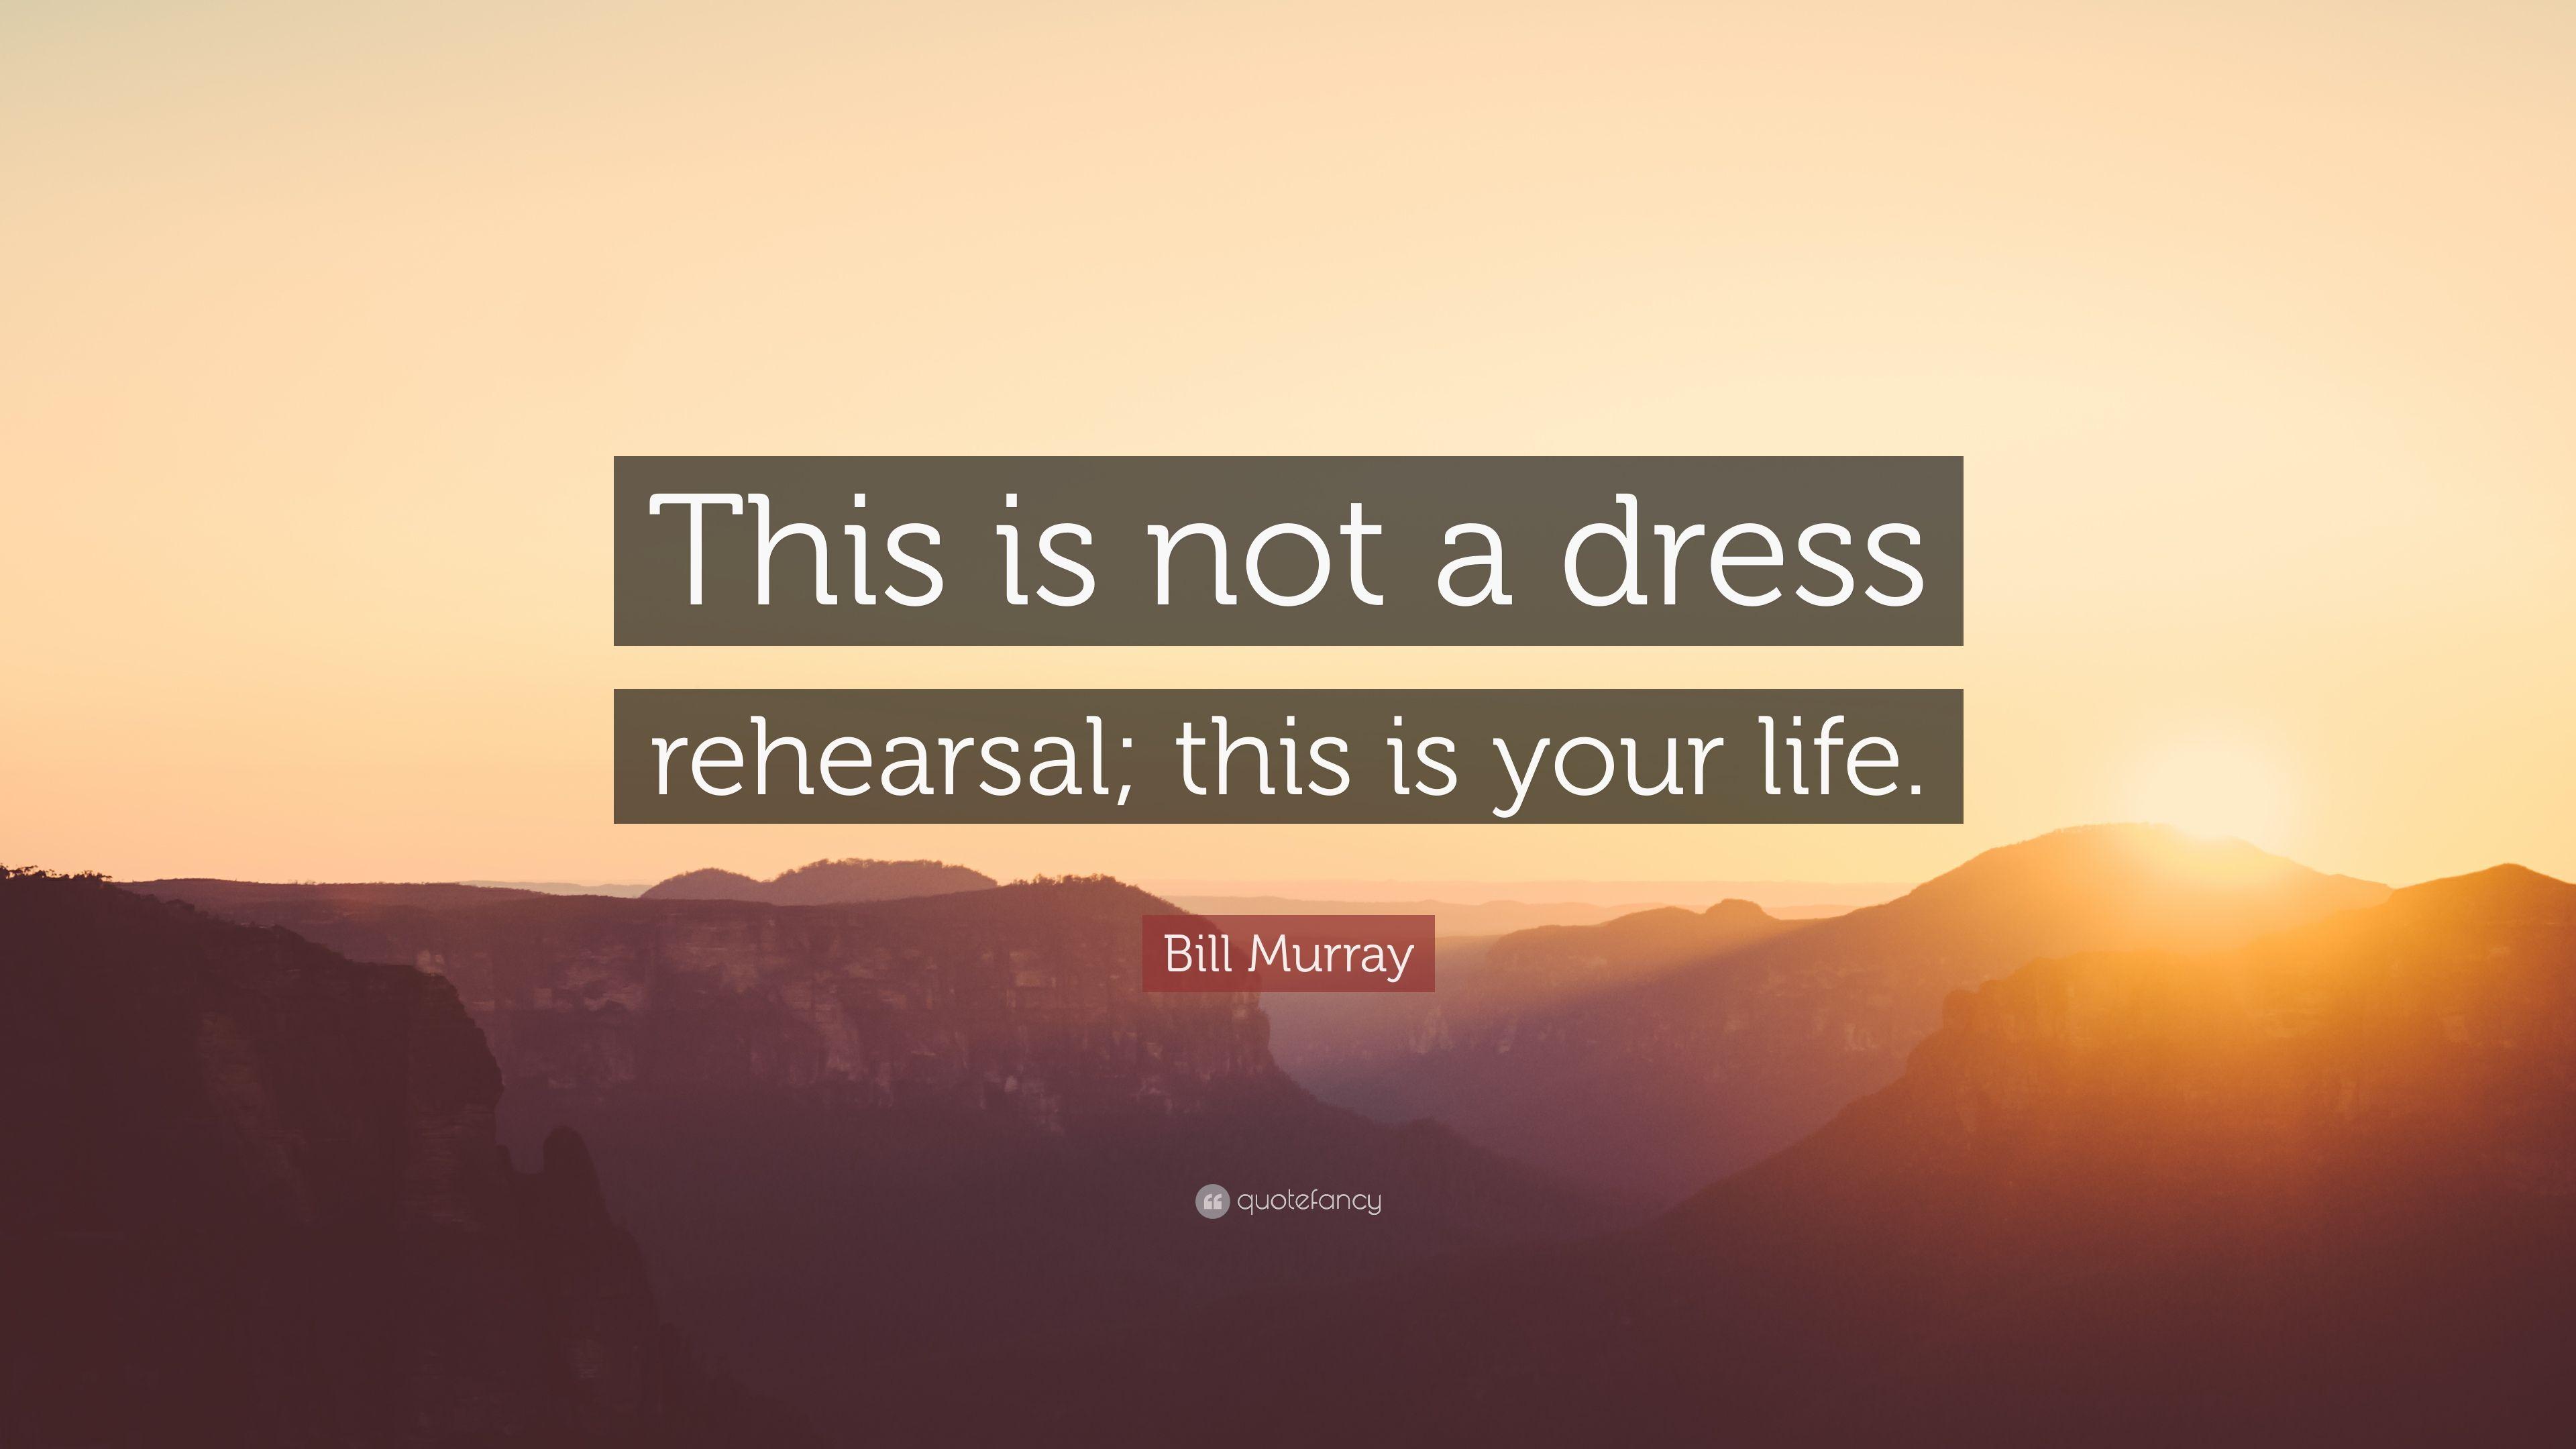 Bill Murray Quote: “This is not a dress rehearsal; this is your